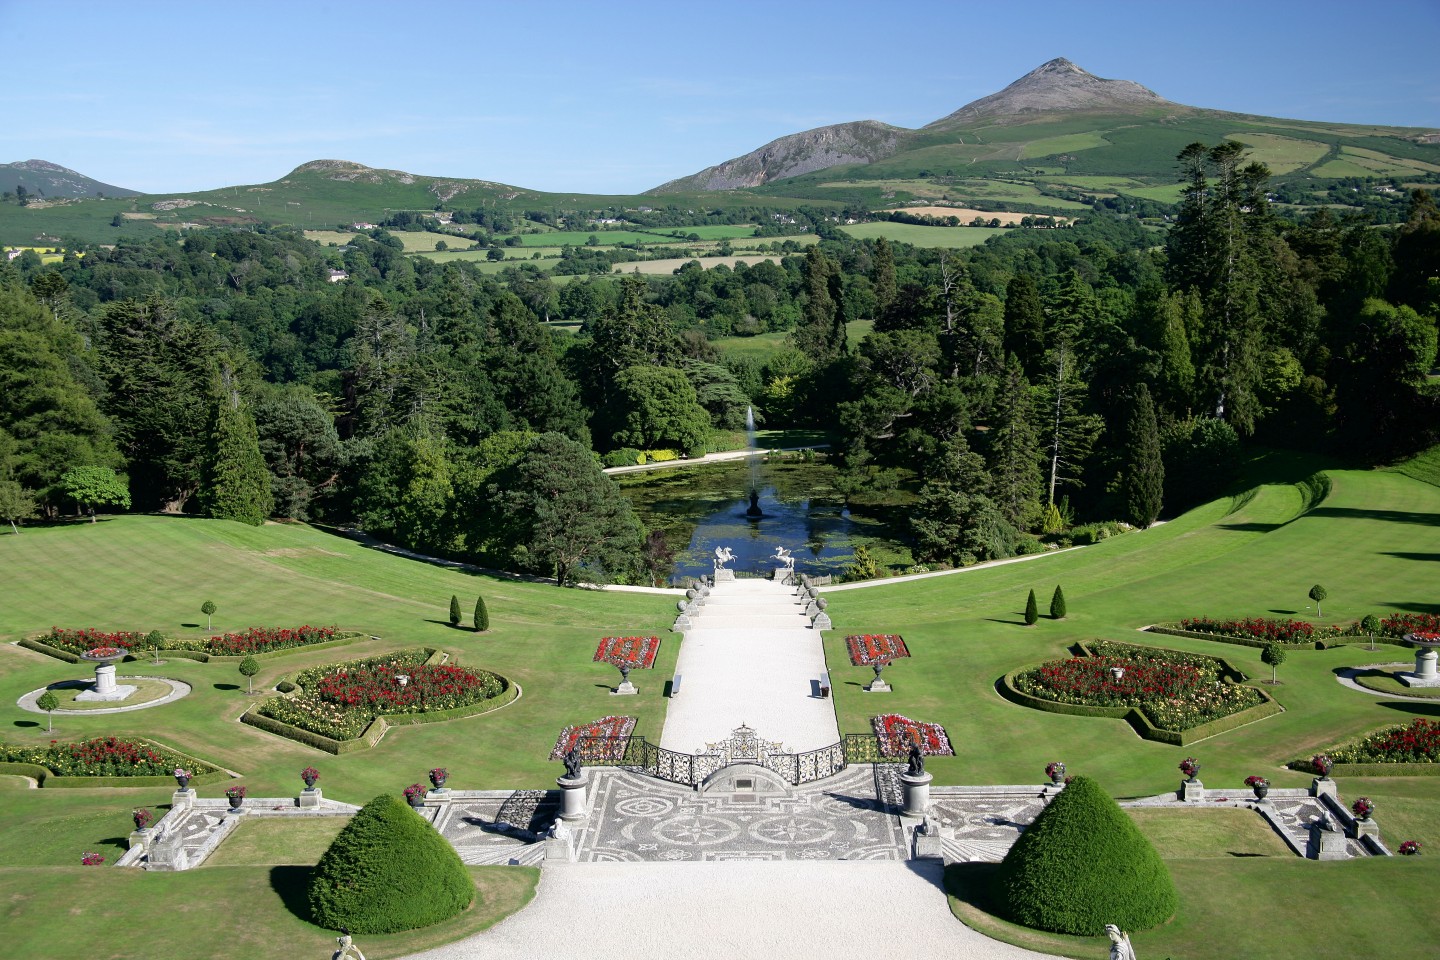 Powerscourt House and Gardens, Co Wicklow, Ireland - Summer Images (8) (NCN-2)